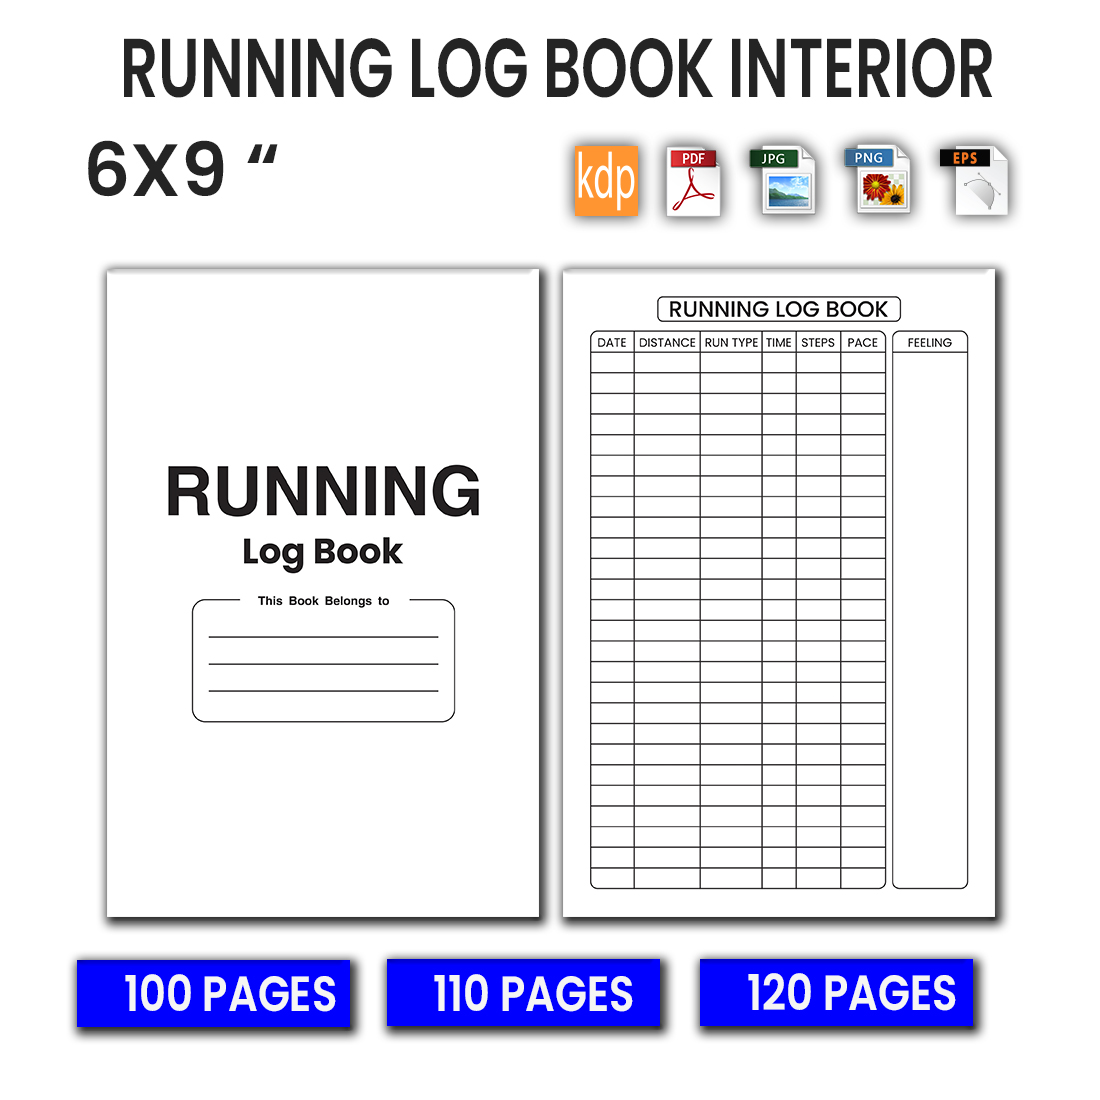 Picture with blank exquisite cover and pages of running log book.